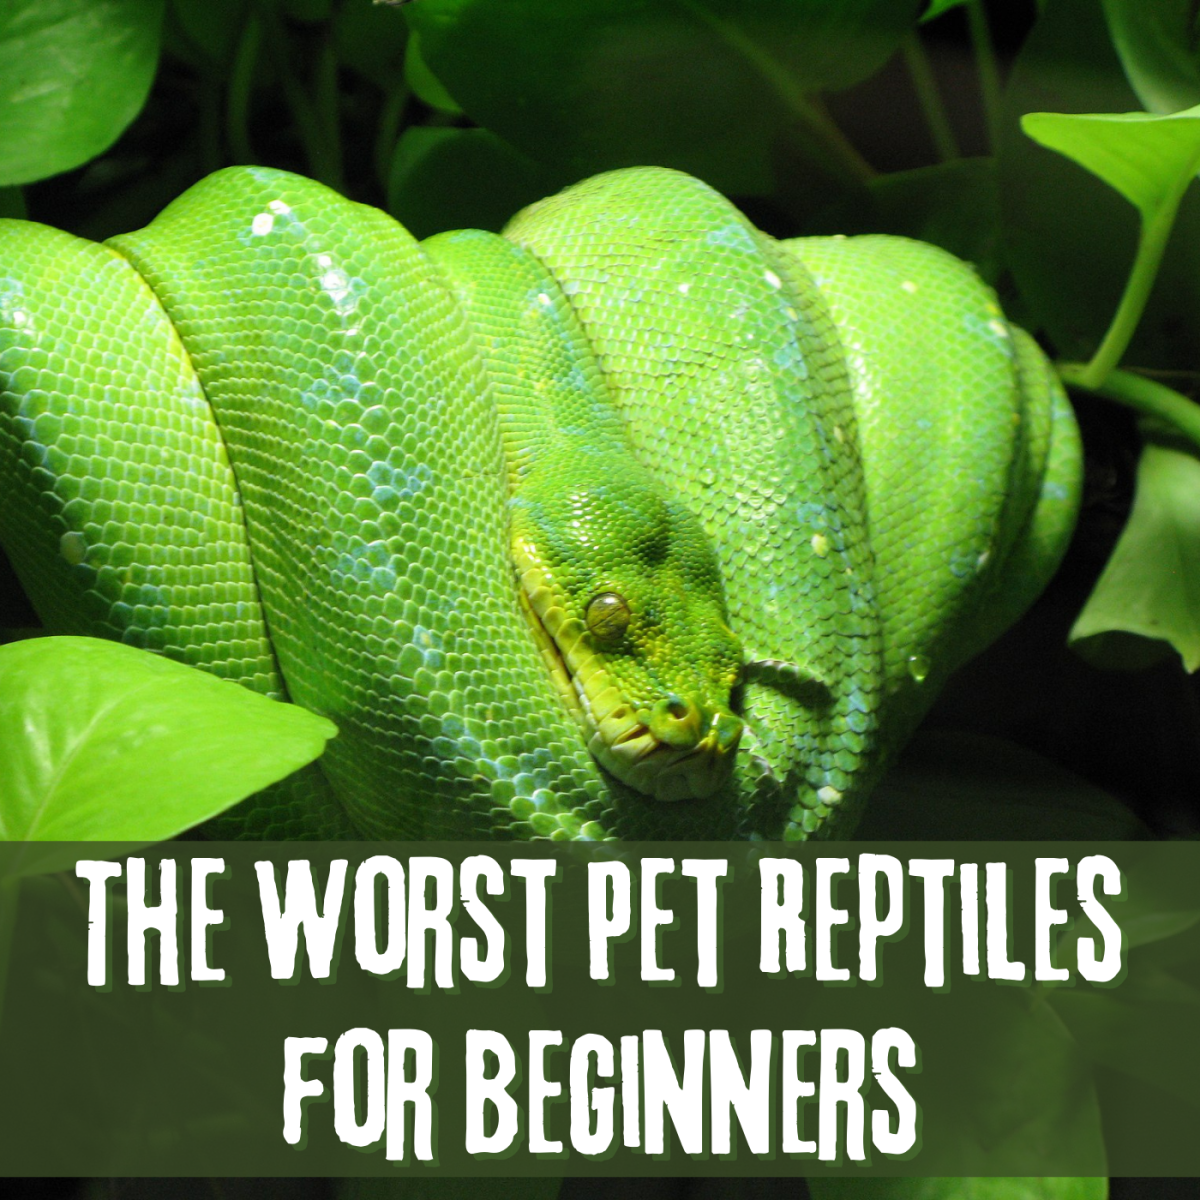 The green tree python is a beautiful but aggressive snake and should only be kept by experienced snake keepers. Learn about other reptiles that can make great pets, but not for beginners.